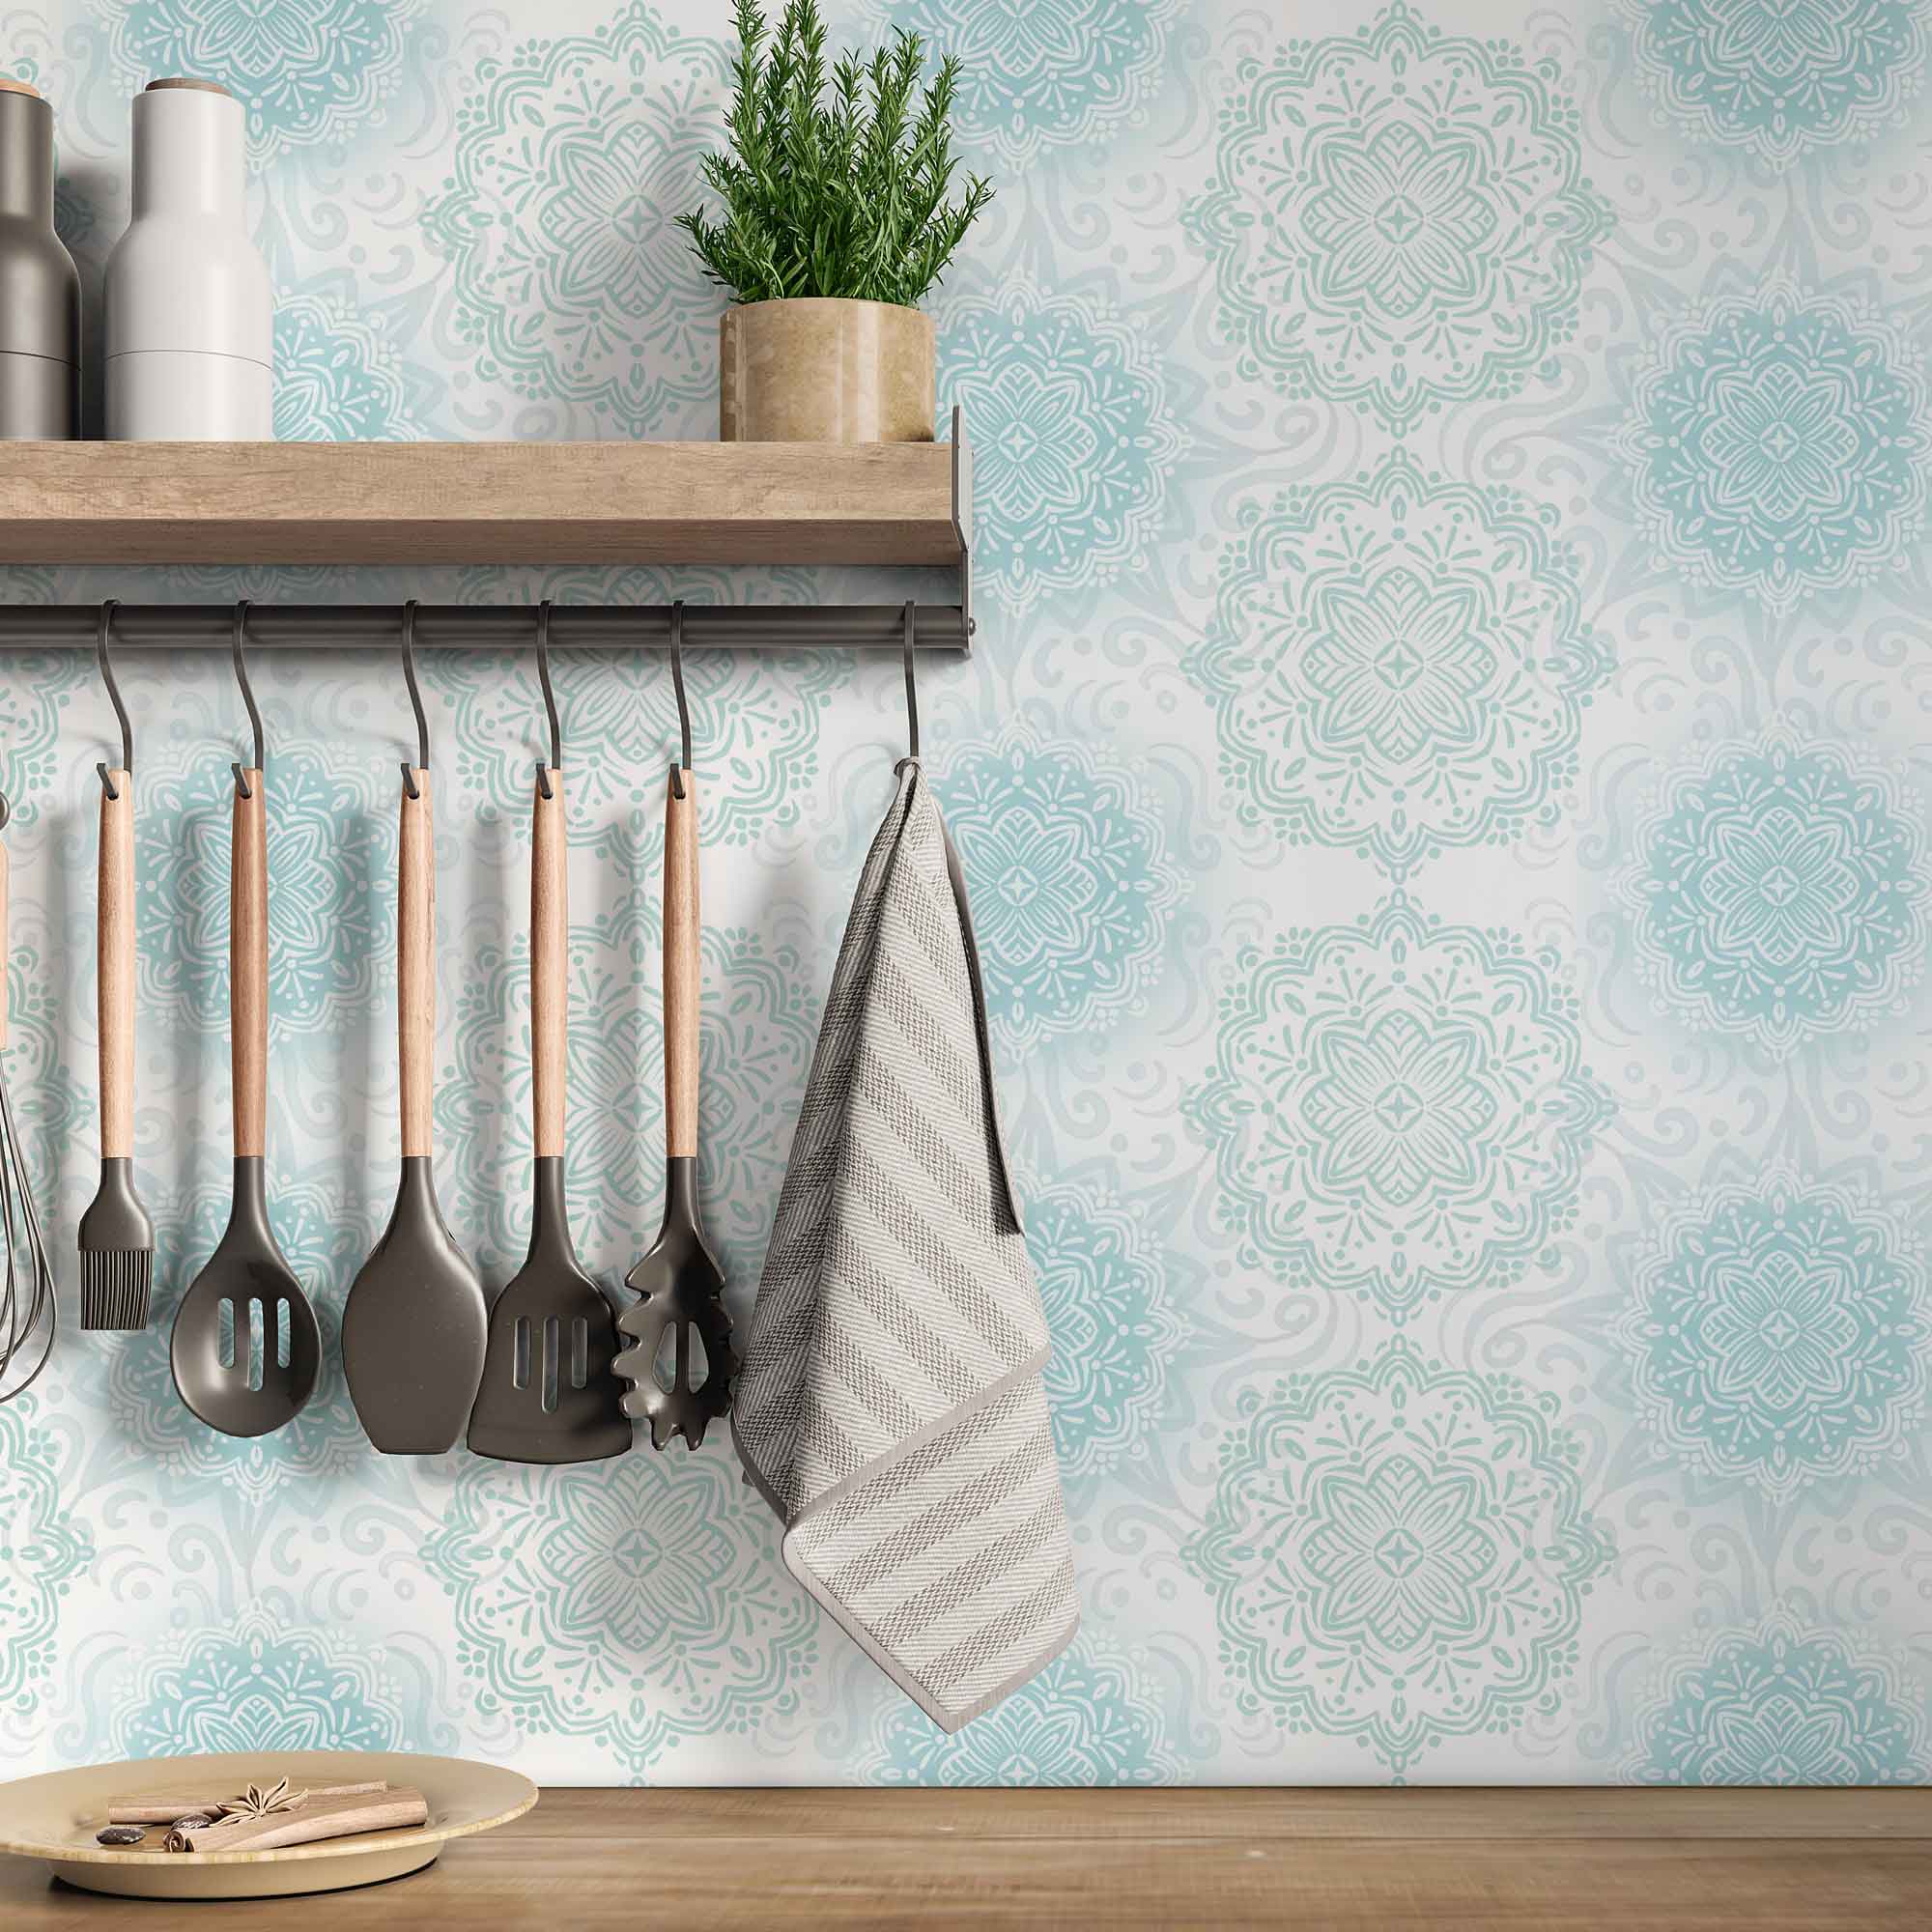 Boho Hand-drawn Mandalas in pastel Blue and Aqua Removable Peel & Stick and Pre-Pasted Wallpaper Kitchen example